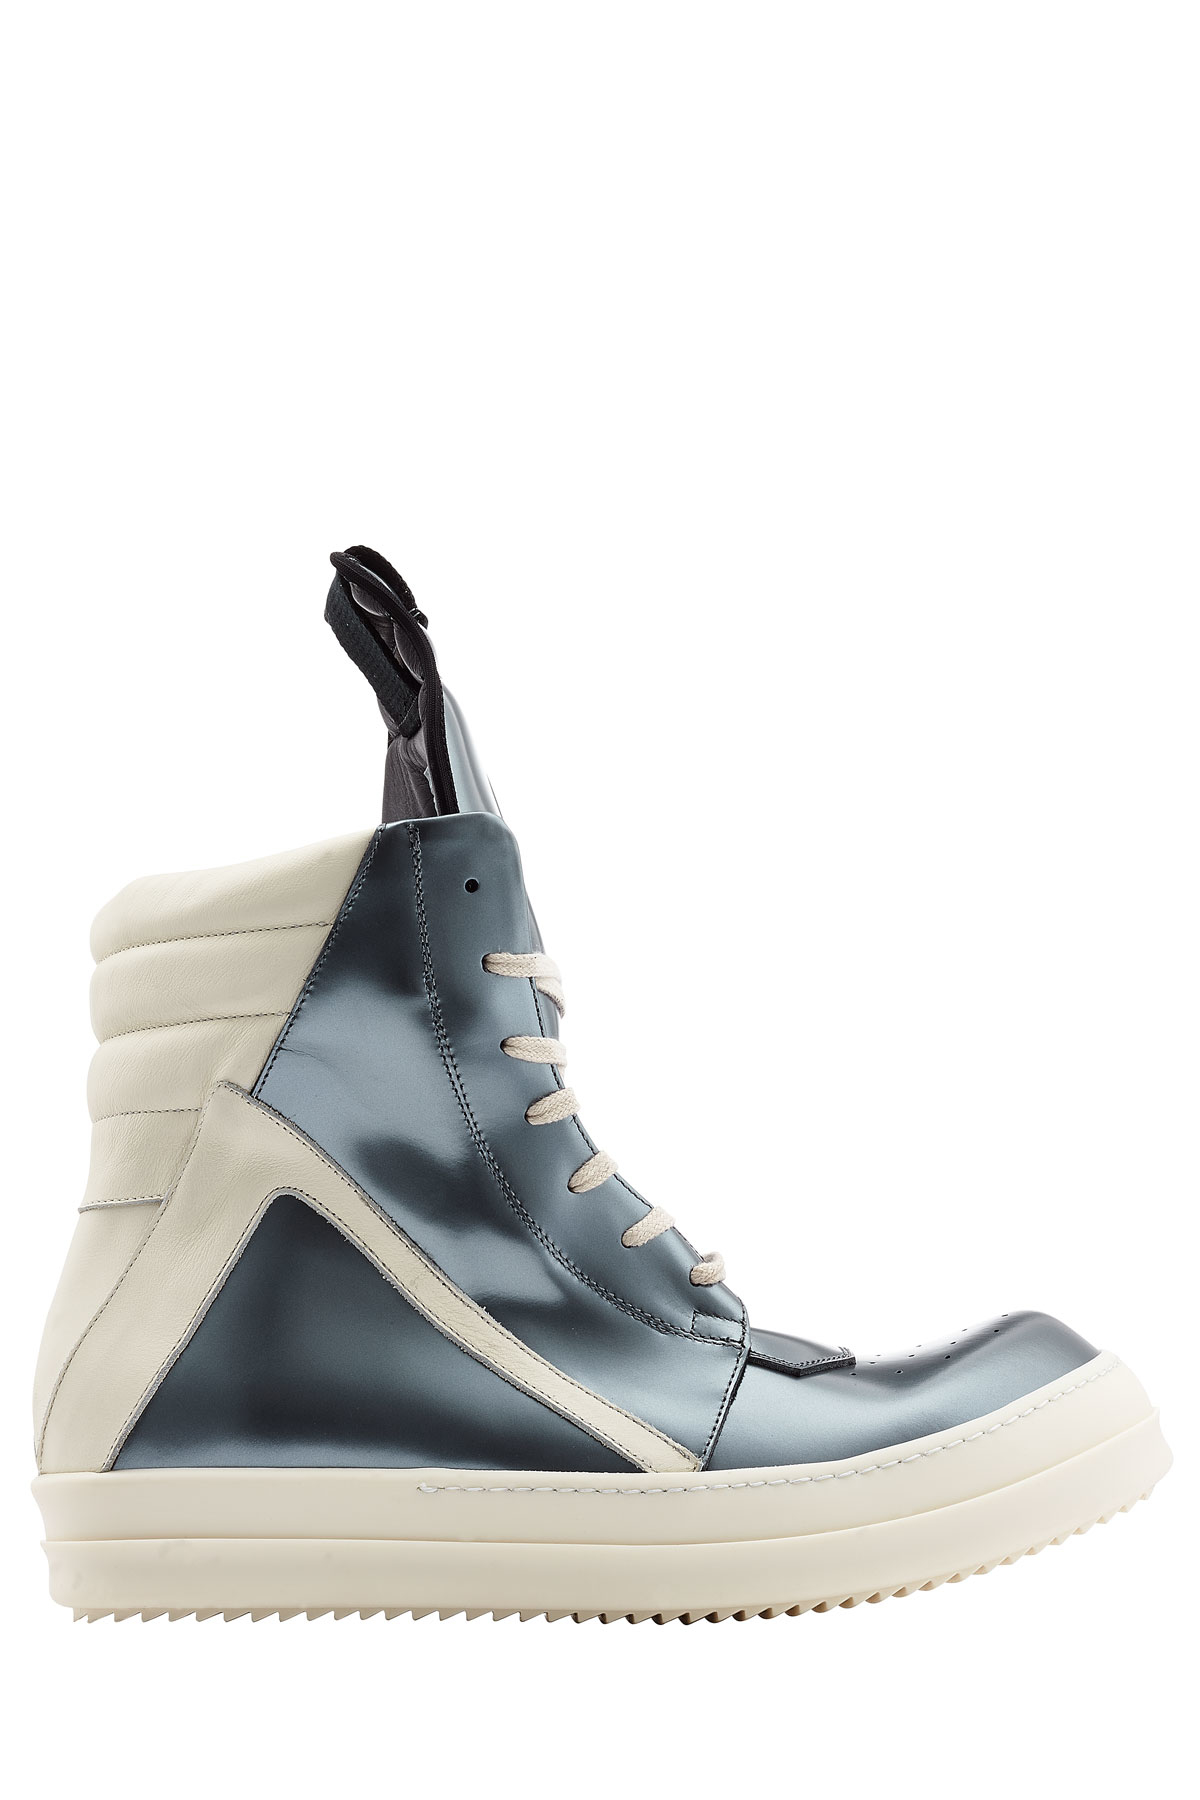 Lyst - Rick Owens Geobasket Leather High-top Sneakers - Silver in Blue ...